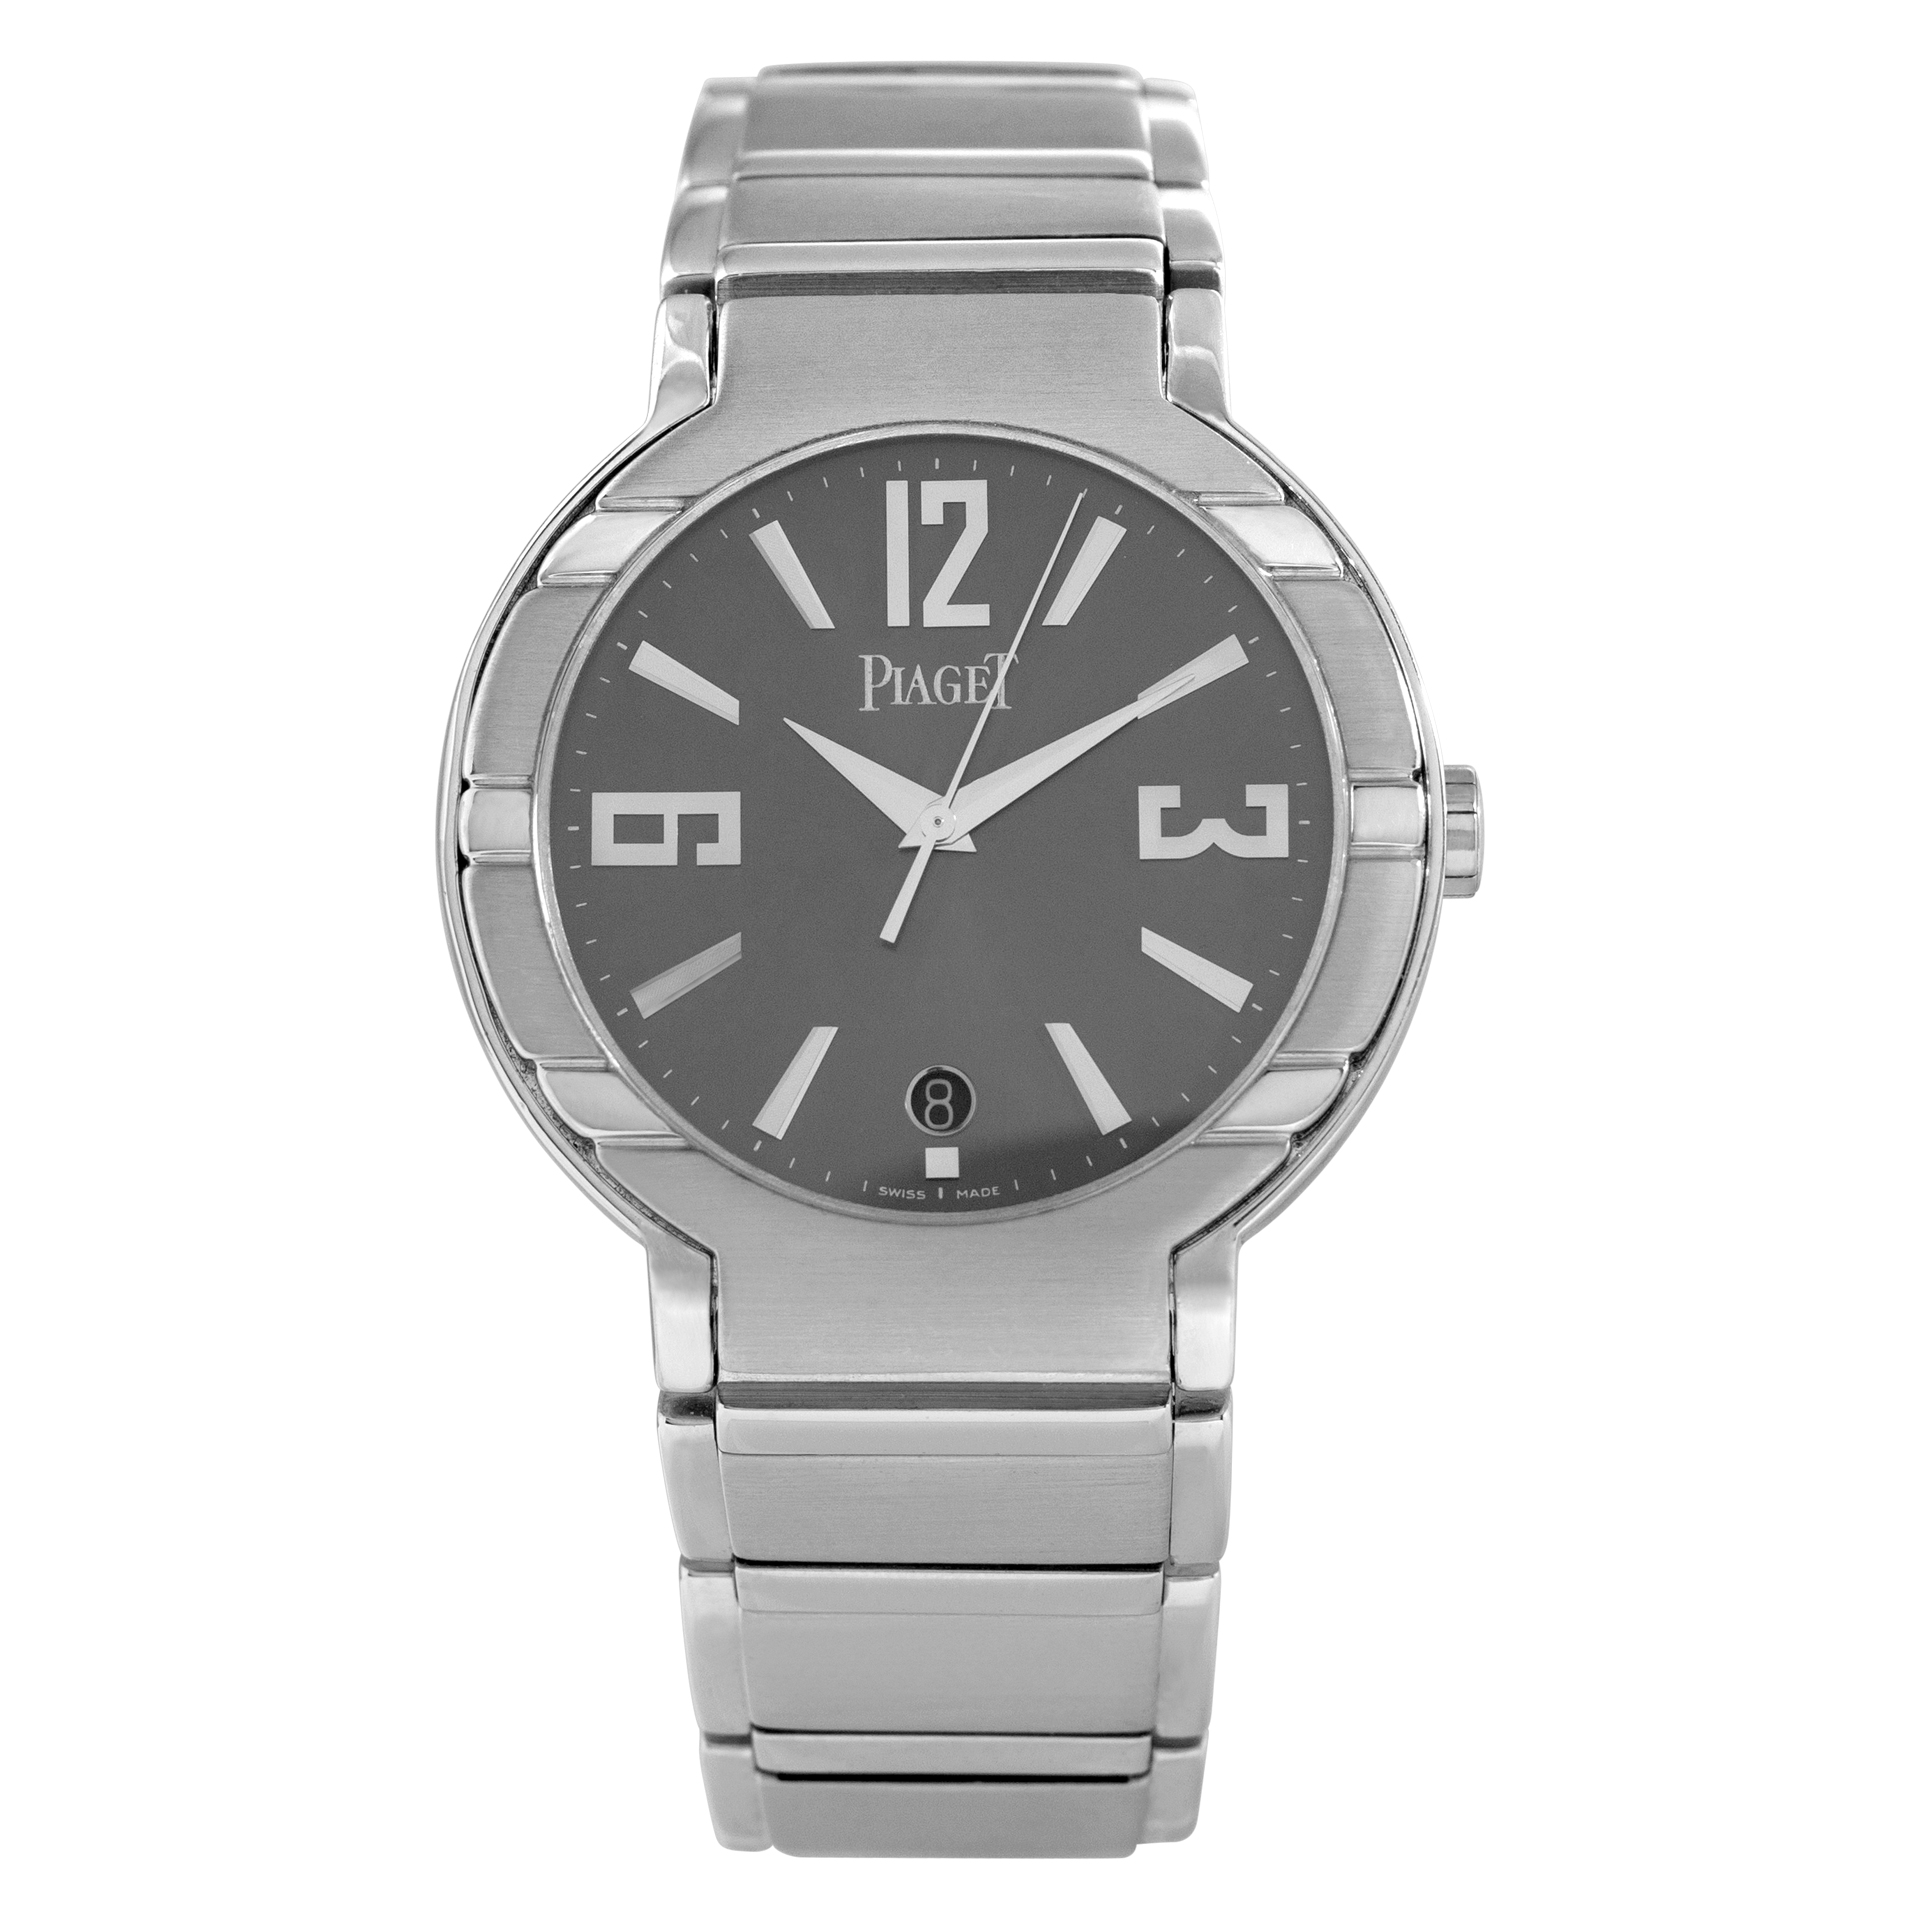 Piaget Polo 38mm 27700 G0A26020 image 1